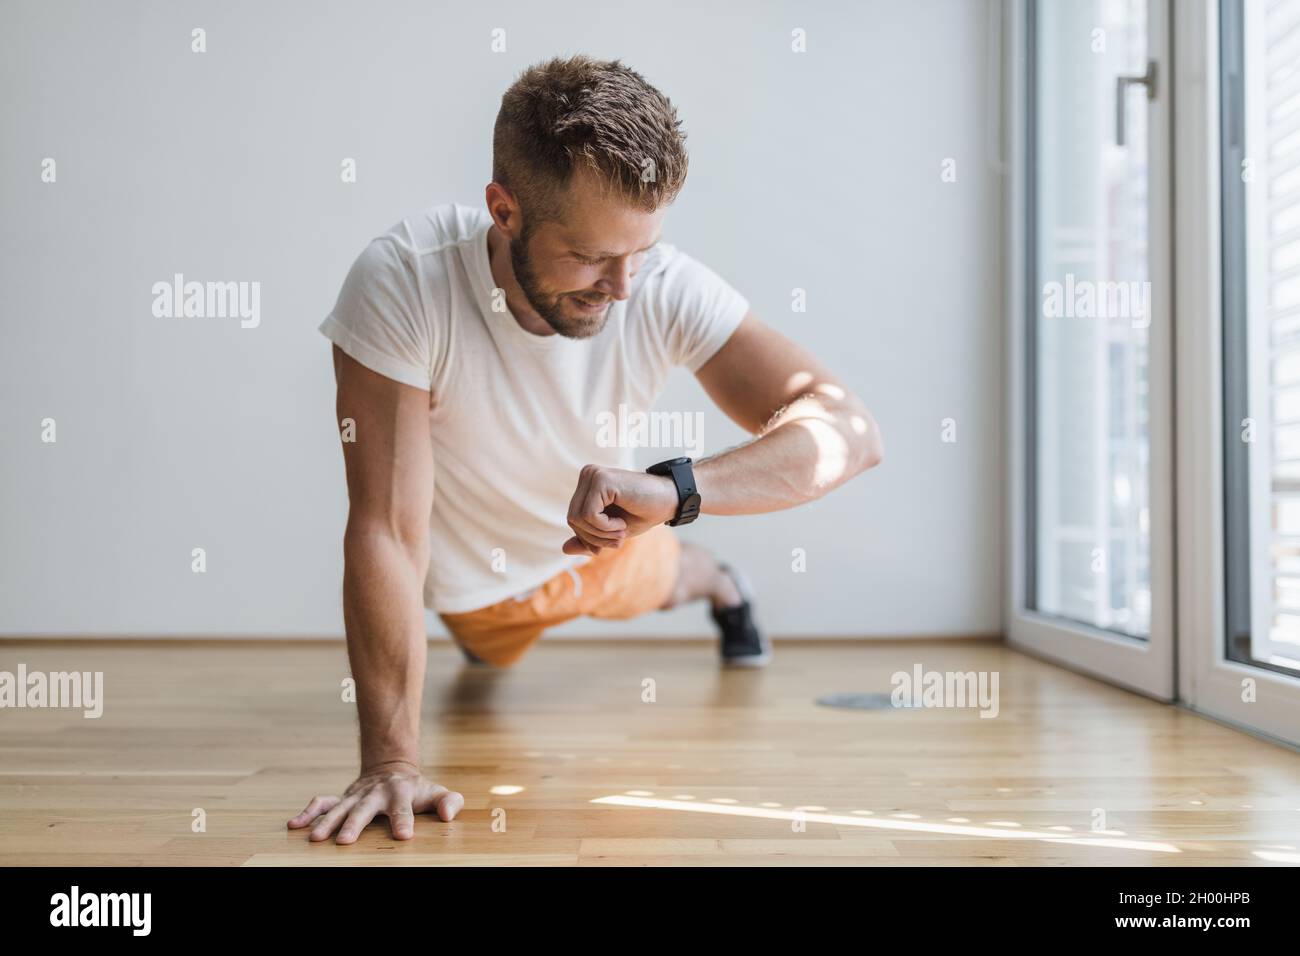 Handsome young man working out at home with a smart watch Stock Photo